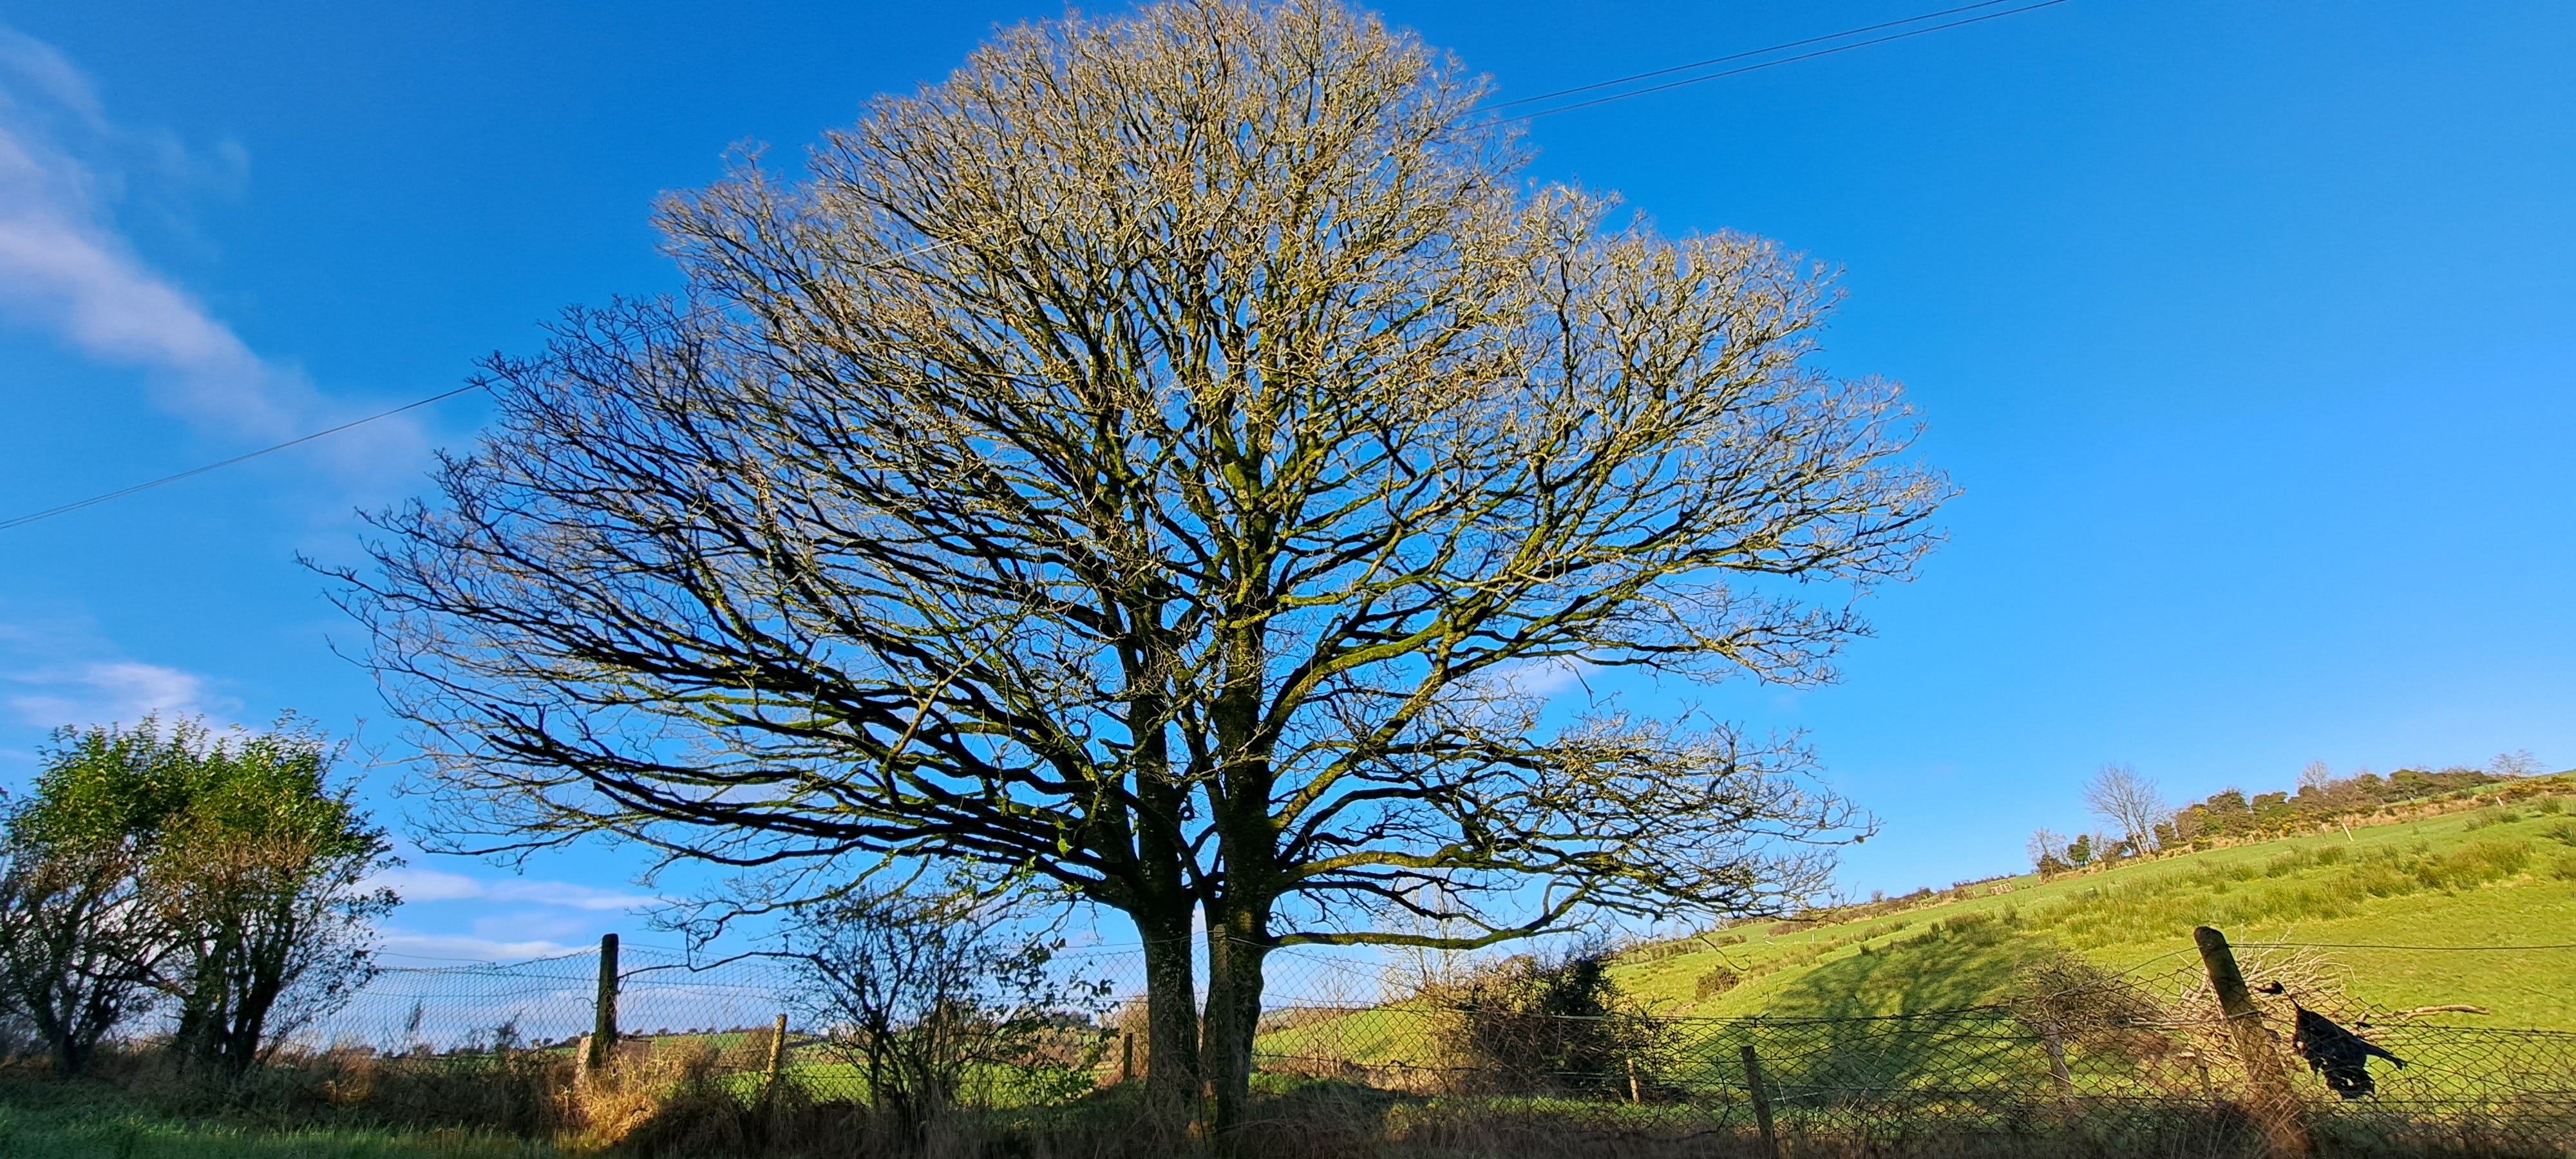 Huge tree set against a bright blue sky, its branches bare apart from lichens and moss. 